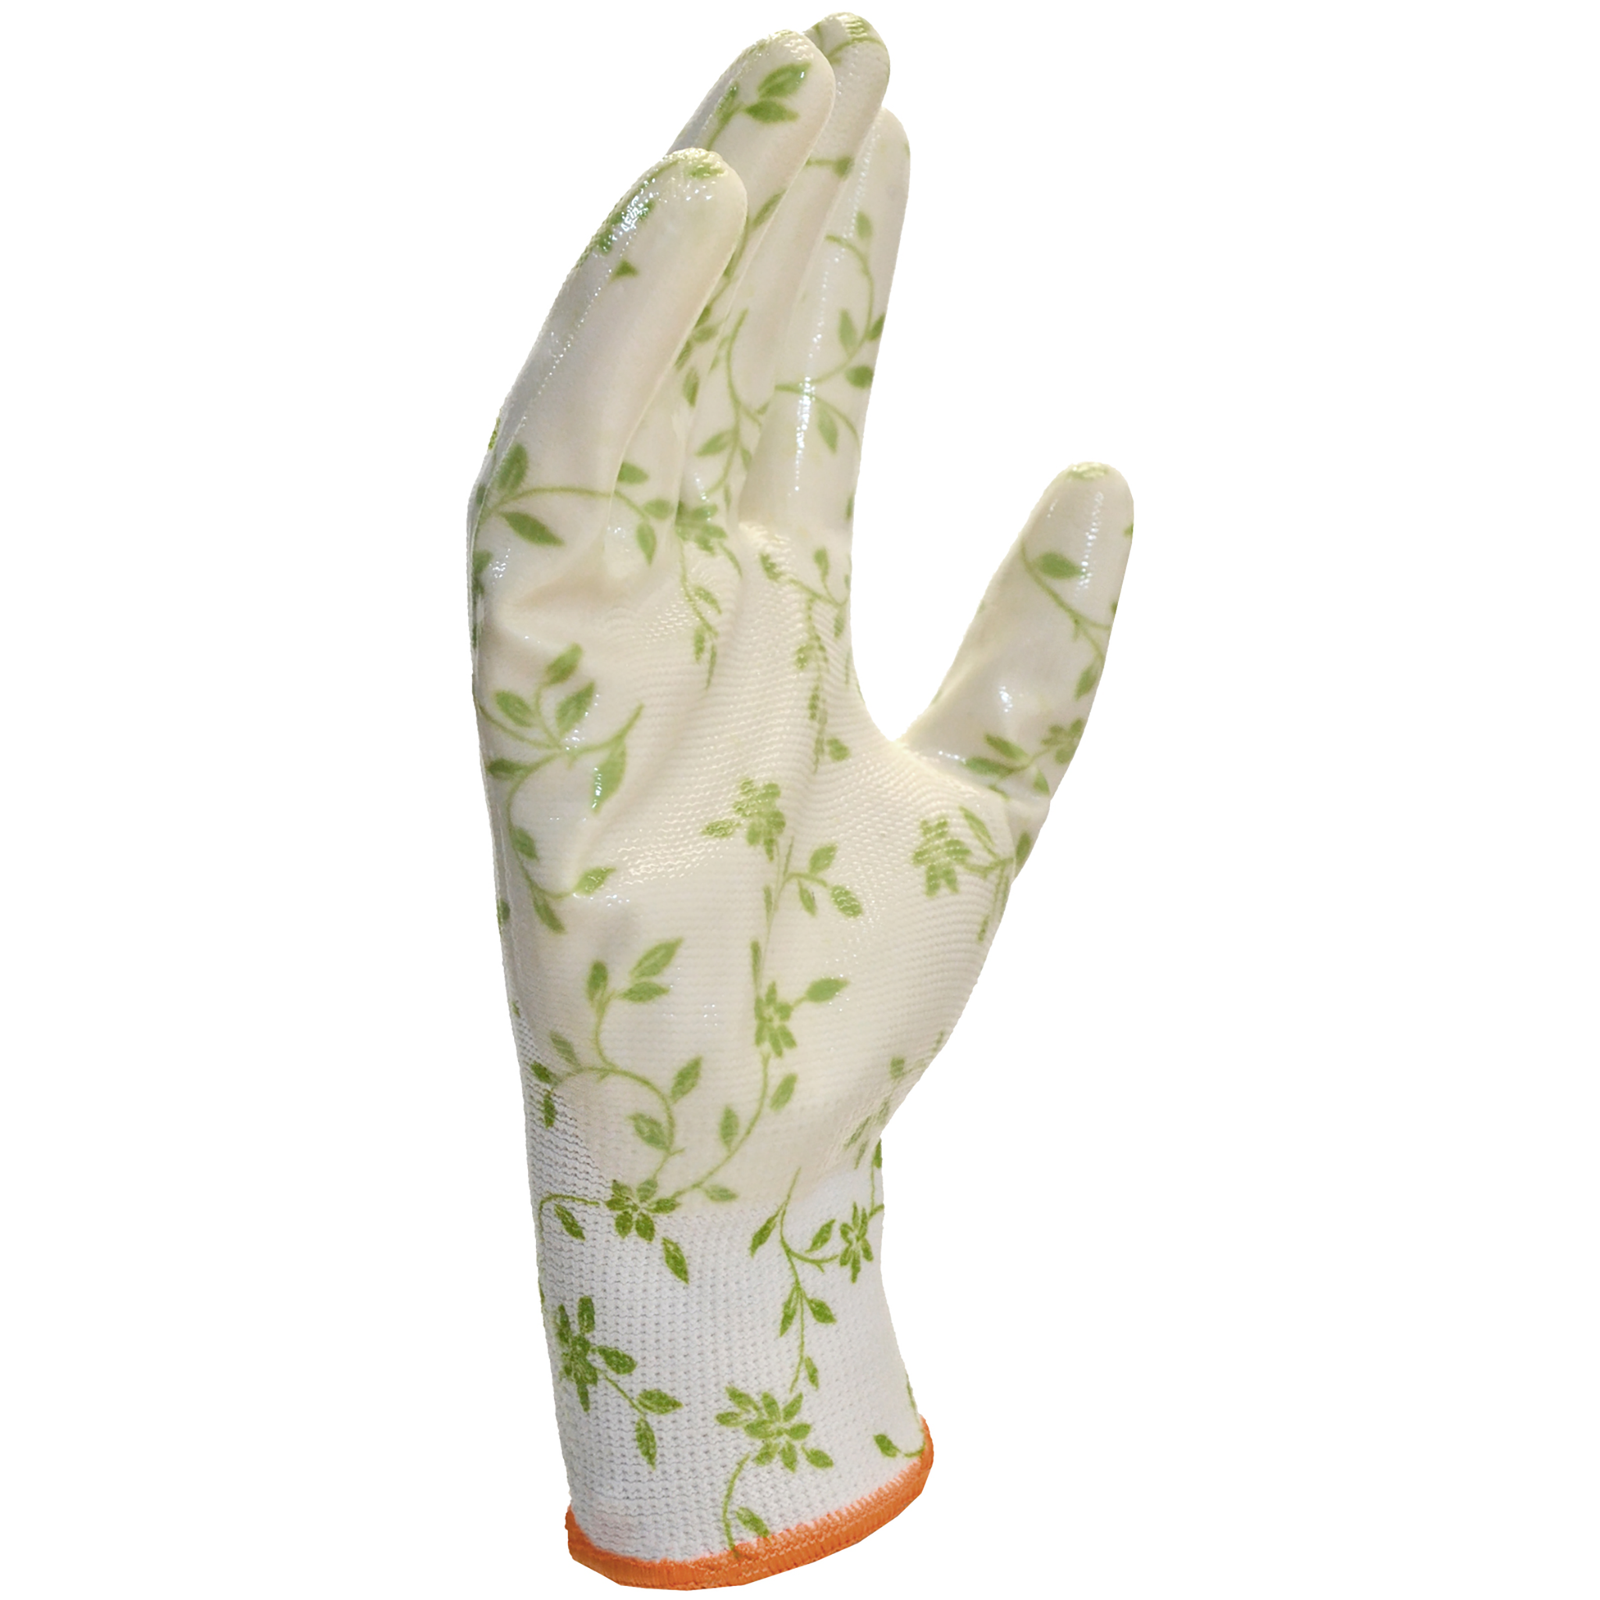 Breathable safety gardening glove with nitrile sipped palms 